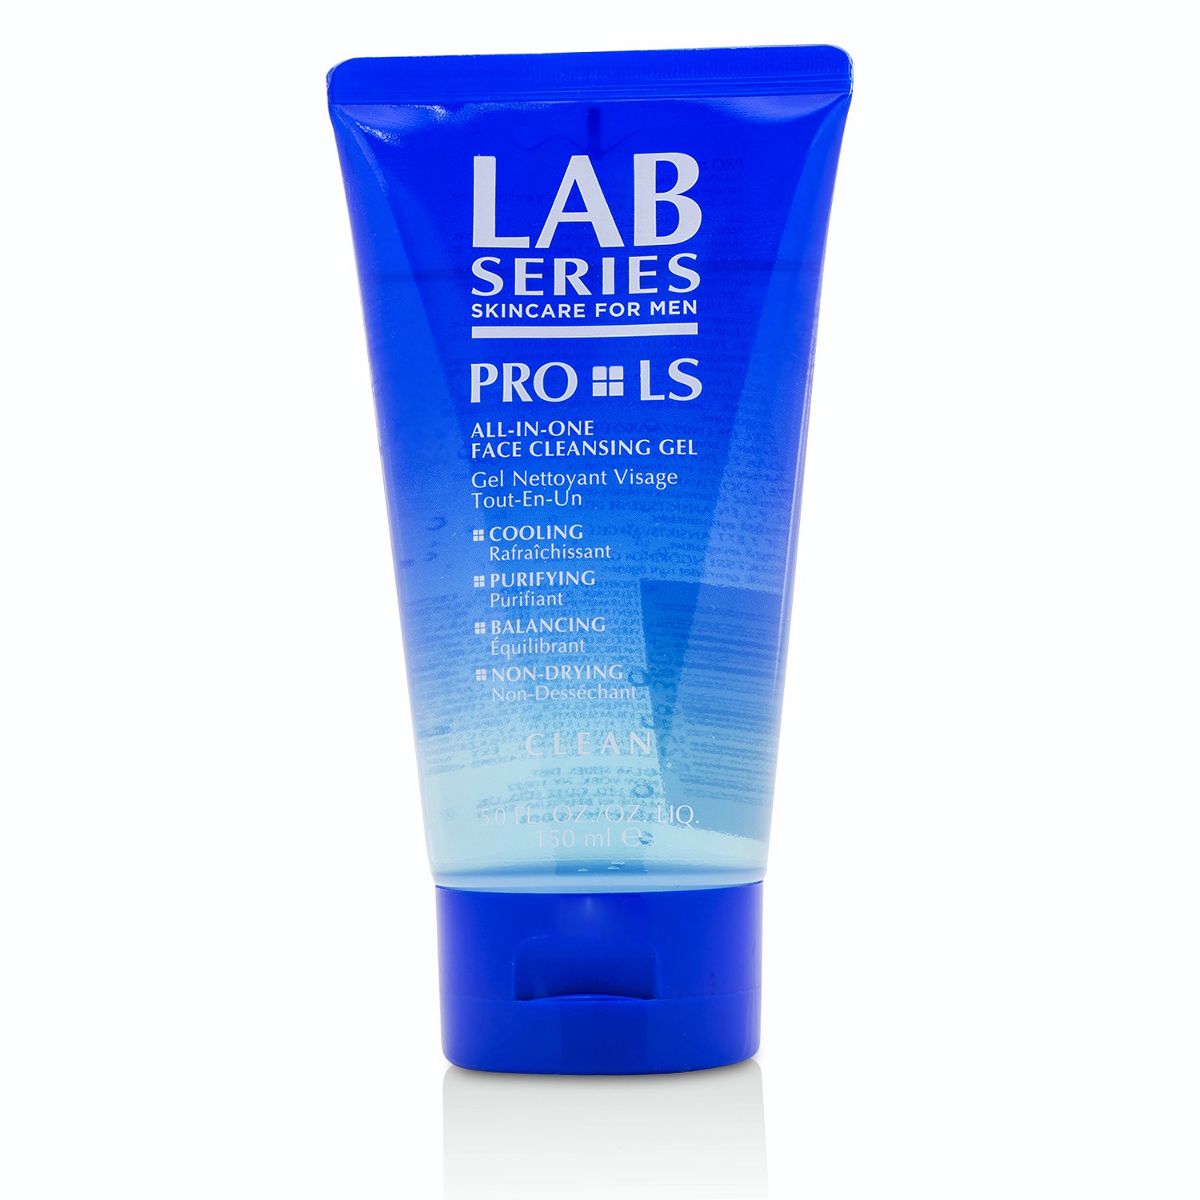 Lab Series Pro LS All In One Face Cleansing Gel Aramis Image